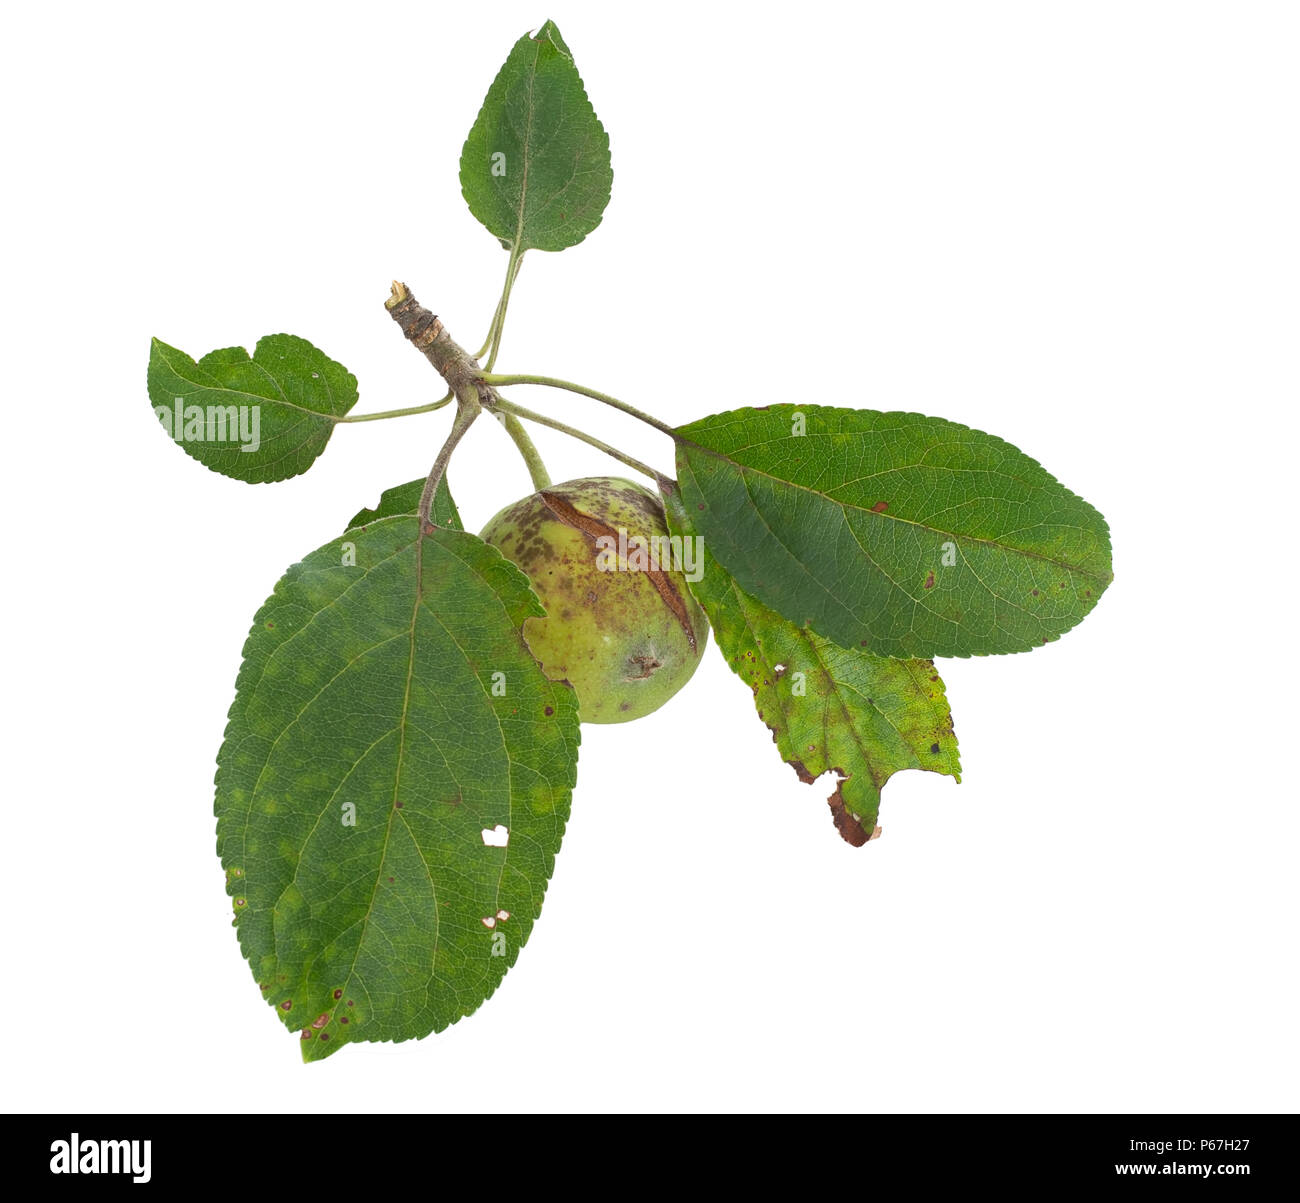 Seriously unwell apple tree. Fruit brown and split, yellow spots on leaves. Scab.. Stock Photo